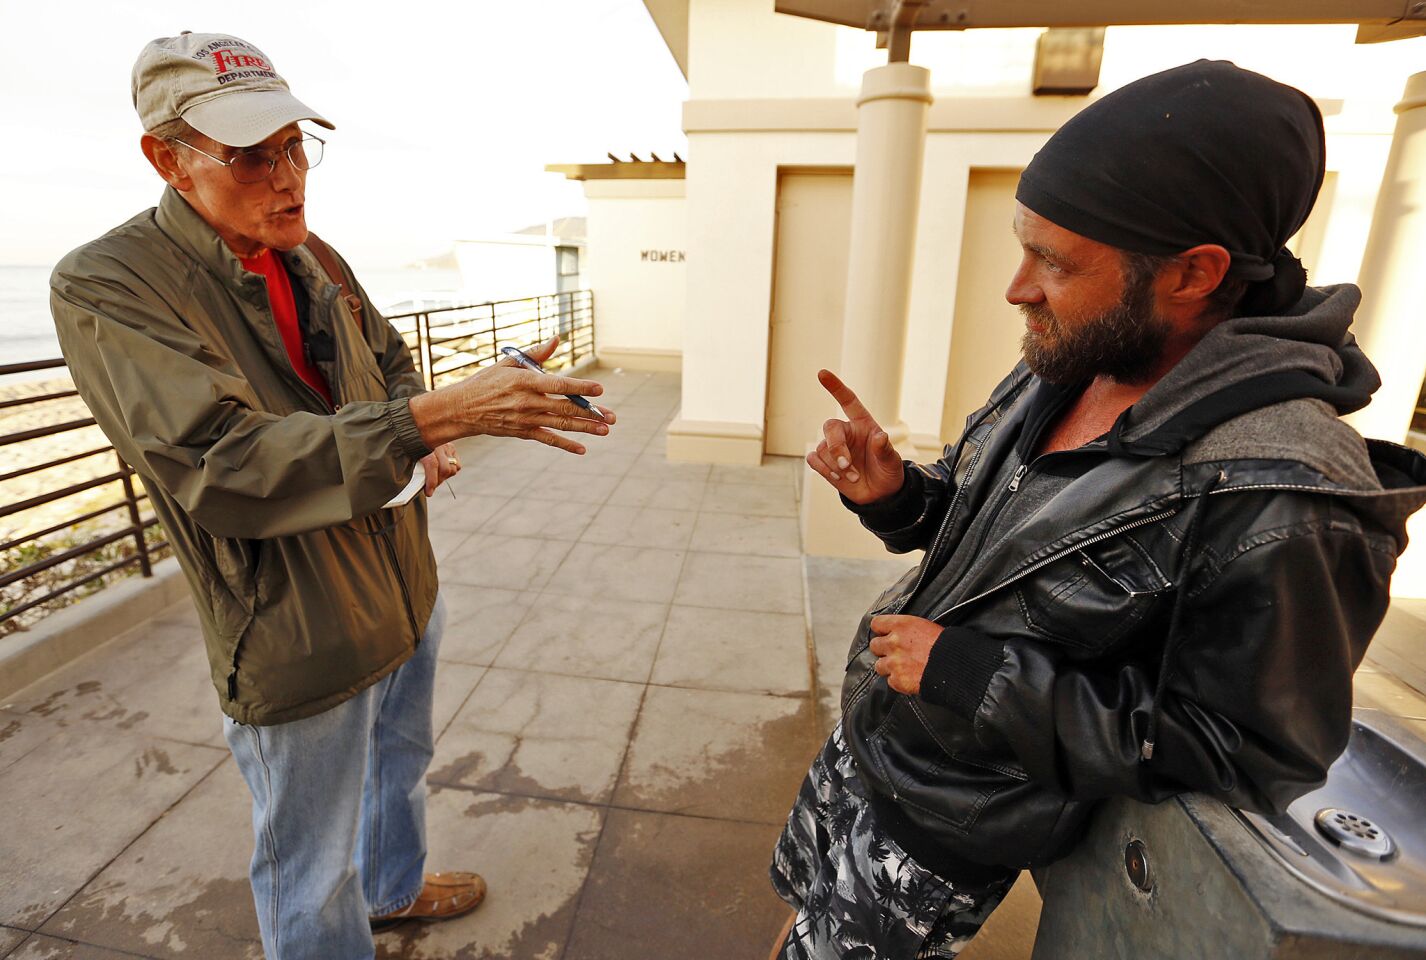 Patrick Hart, left, with the Pacific Palisades Task Force on Homelessness, talks to Brad Mark Kowalski, who is living near the beach, one of several homeless who are living in hidden encampments along Will Rogers State Beach.